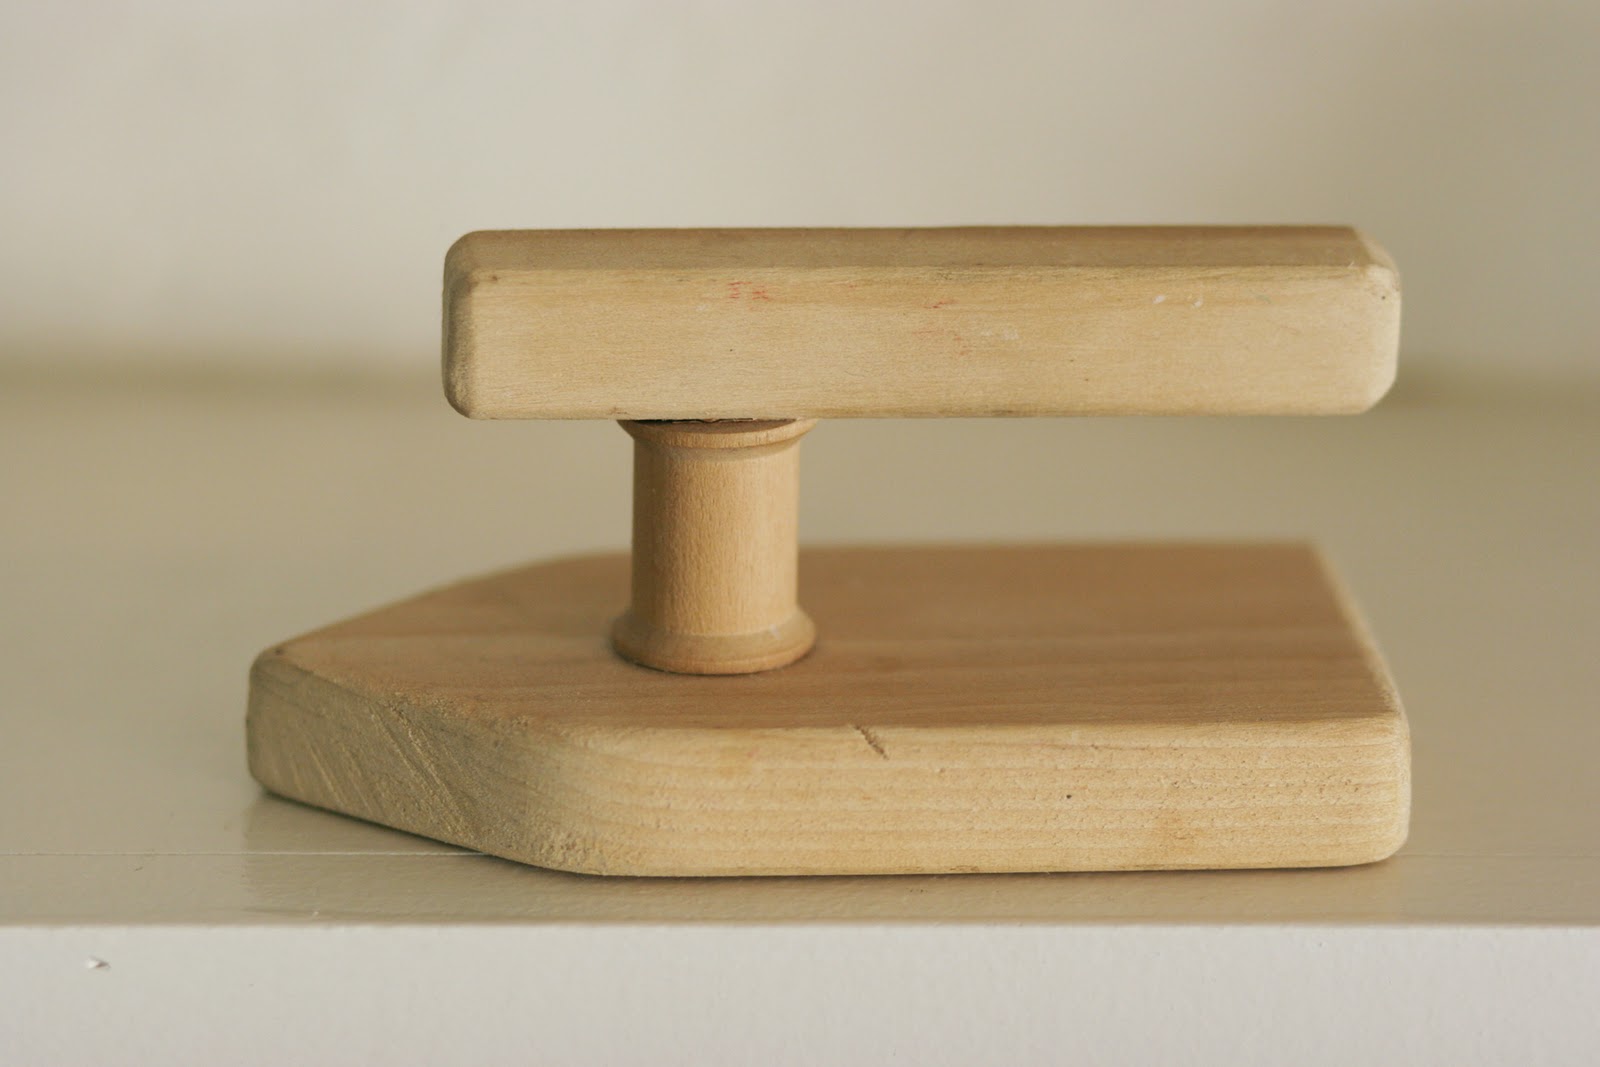 Simple Wooden Toys To Make Here's a simple toy iron that